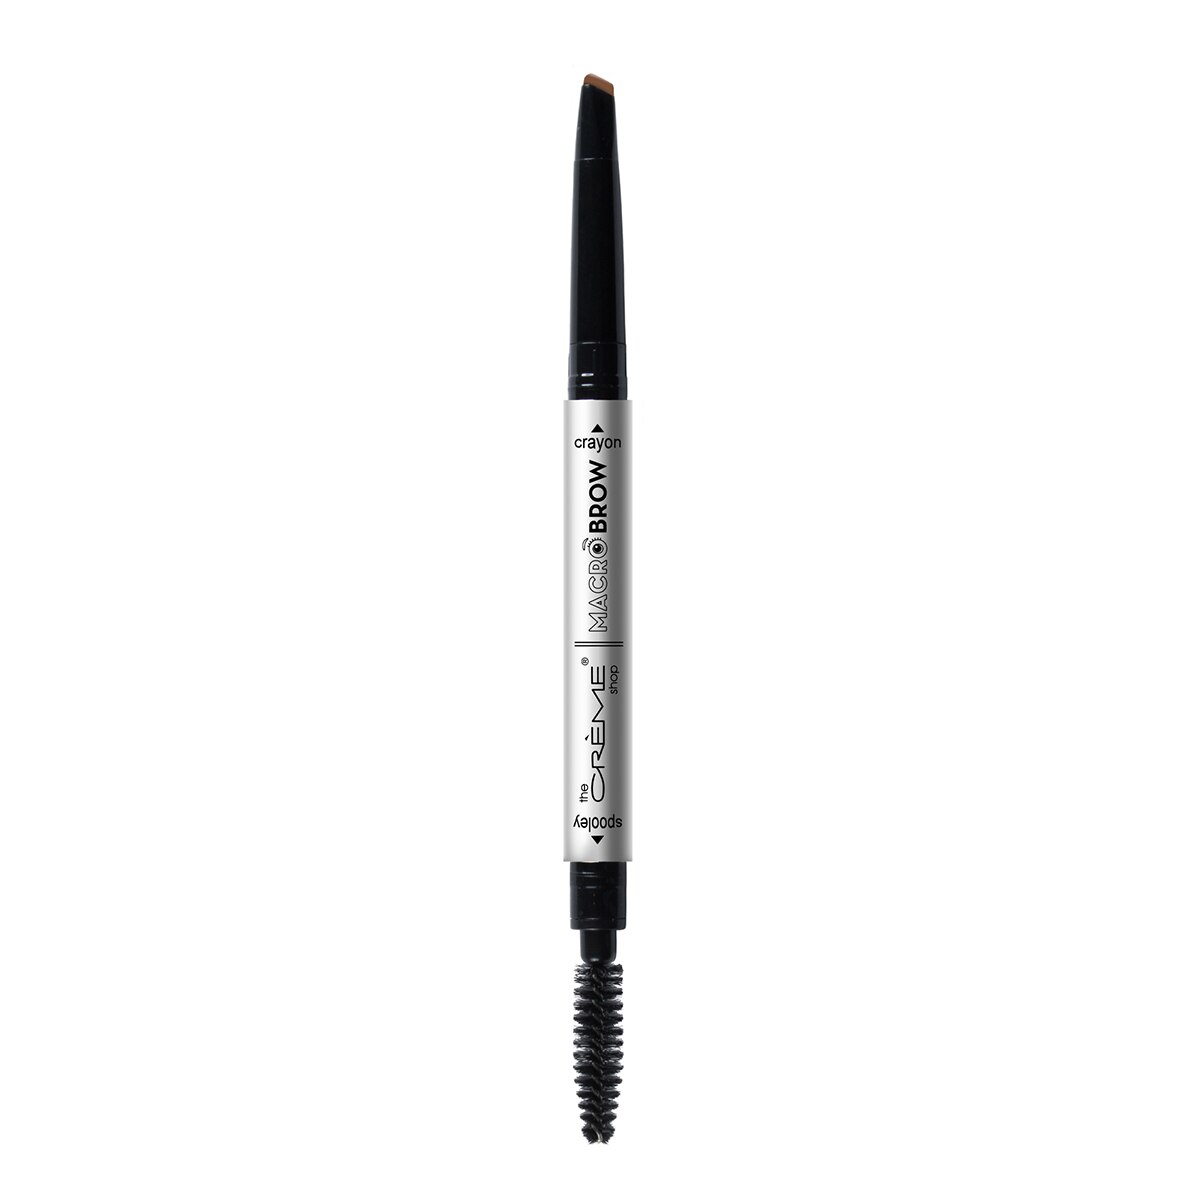 The Creme Shop Macro Brow Pencil | Pick Up In Store TODAY at CVS